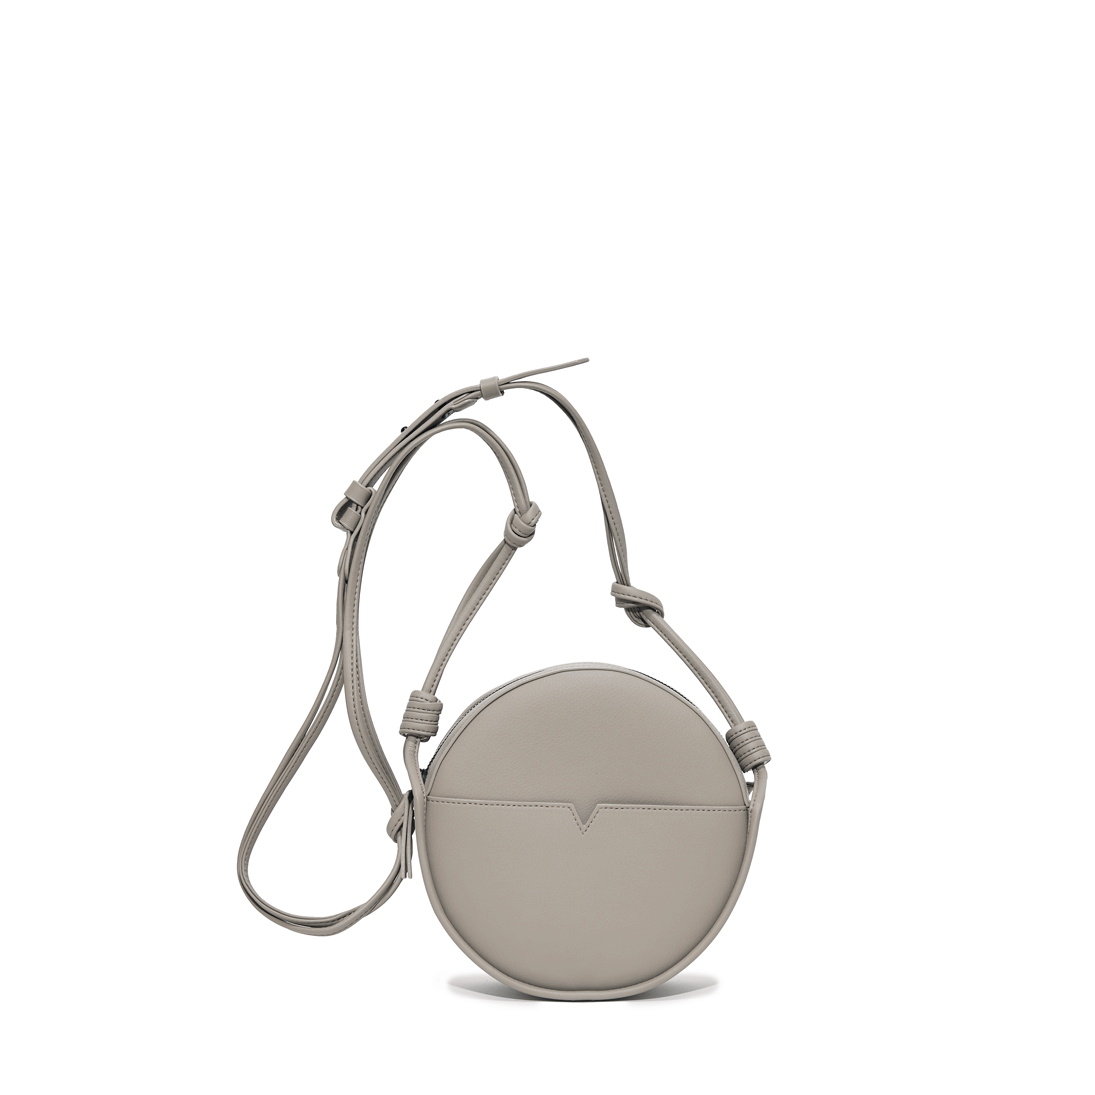 The Circle Crossbody - Sample Sale in Banbū in Stone image 10